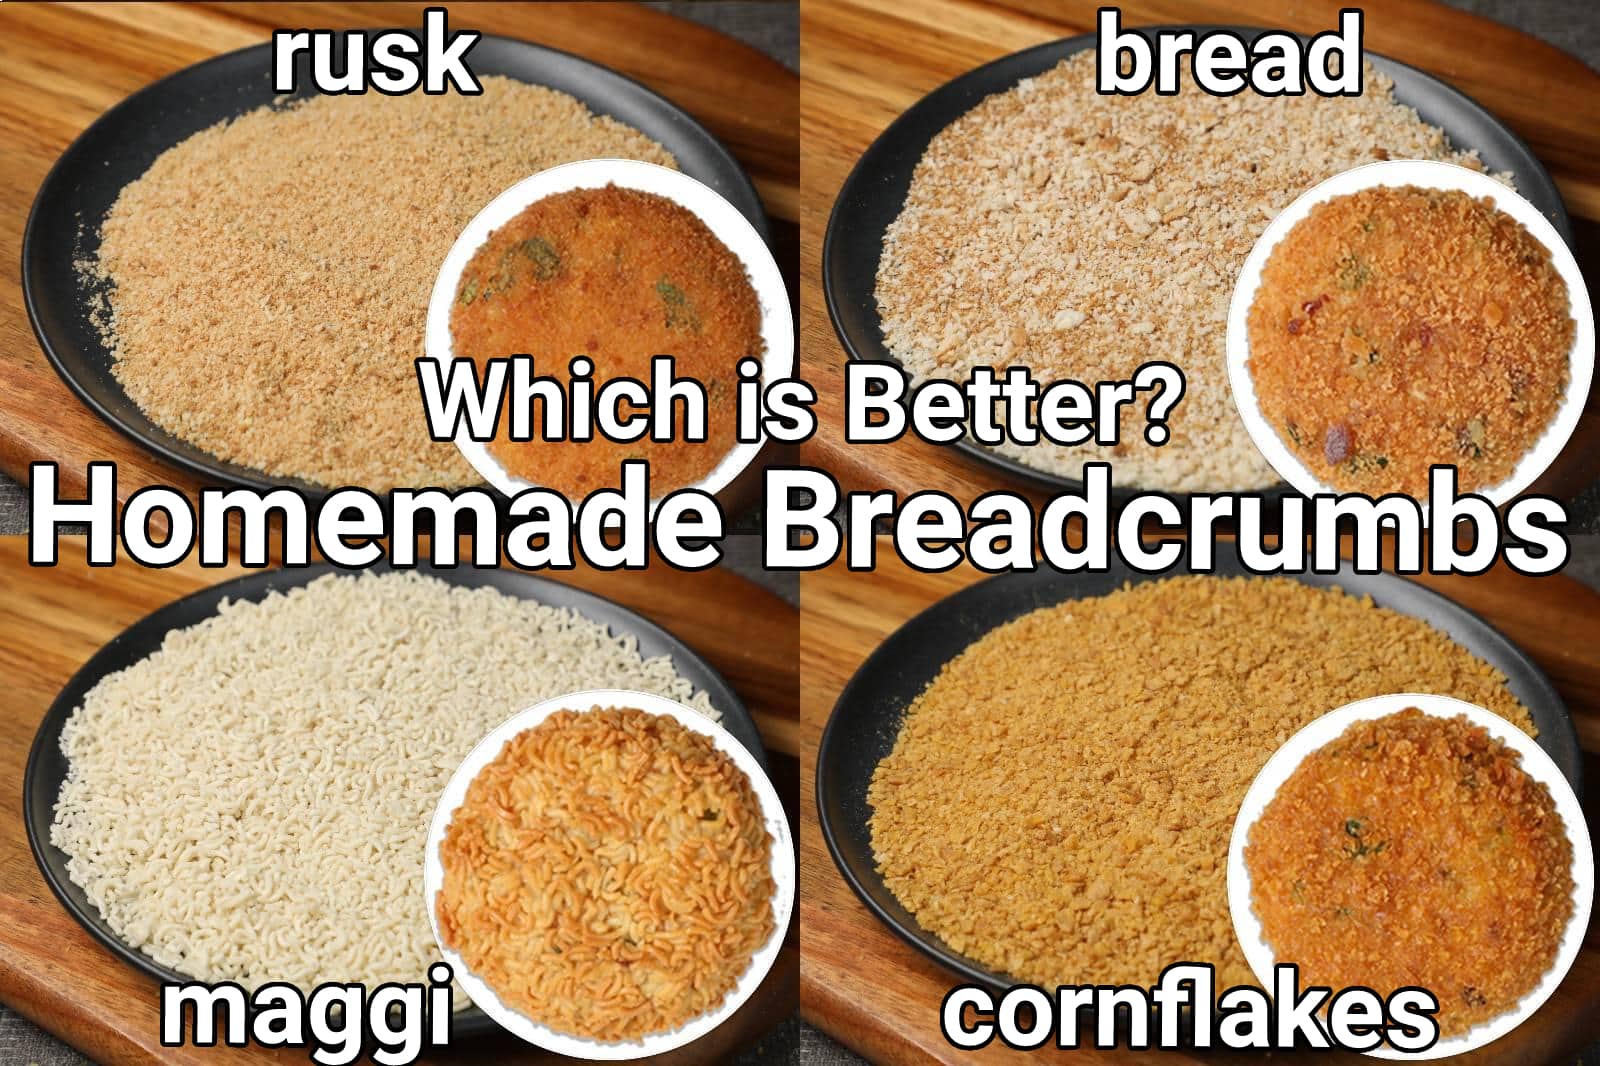 How Is Panko Different From Breadcrumbs?